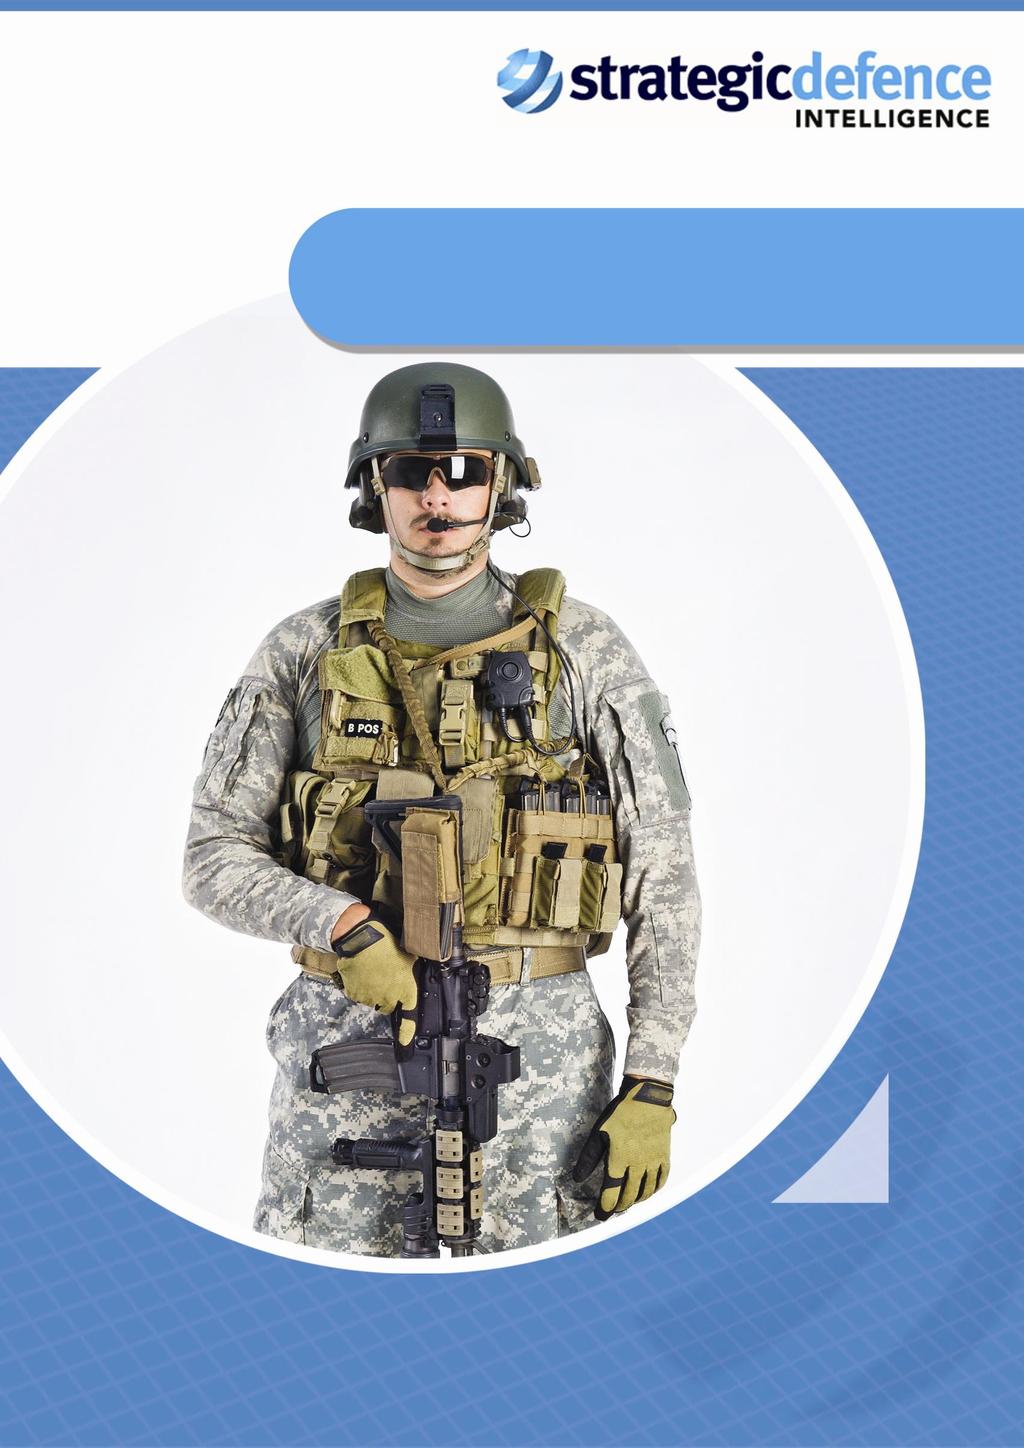 The Global Body Armor and Personal